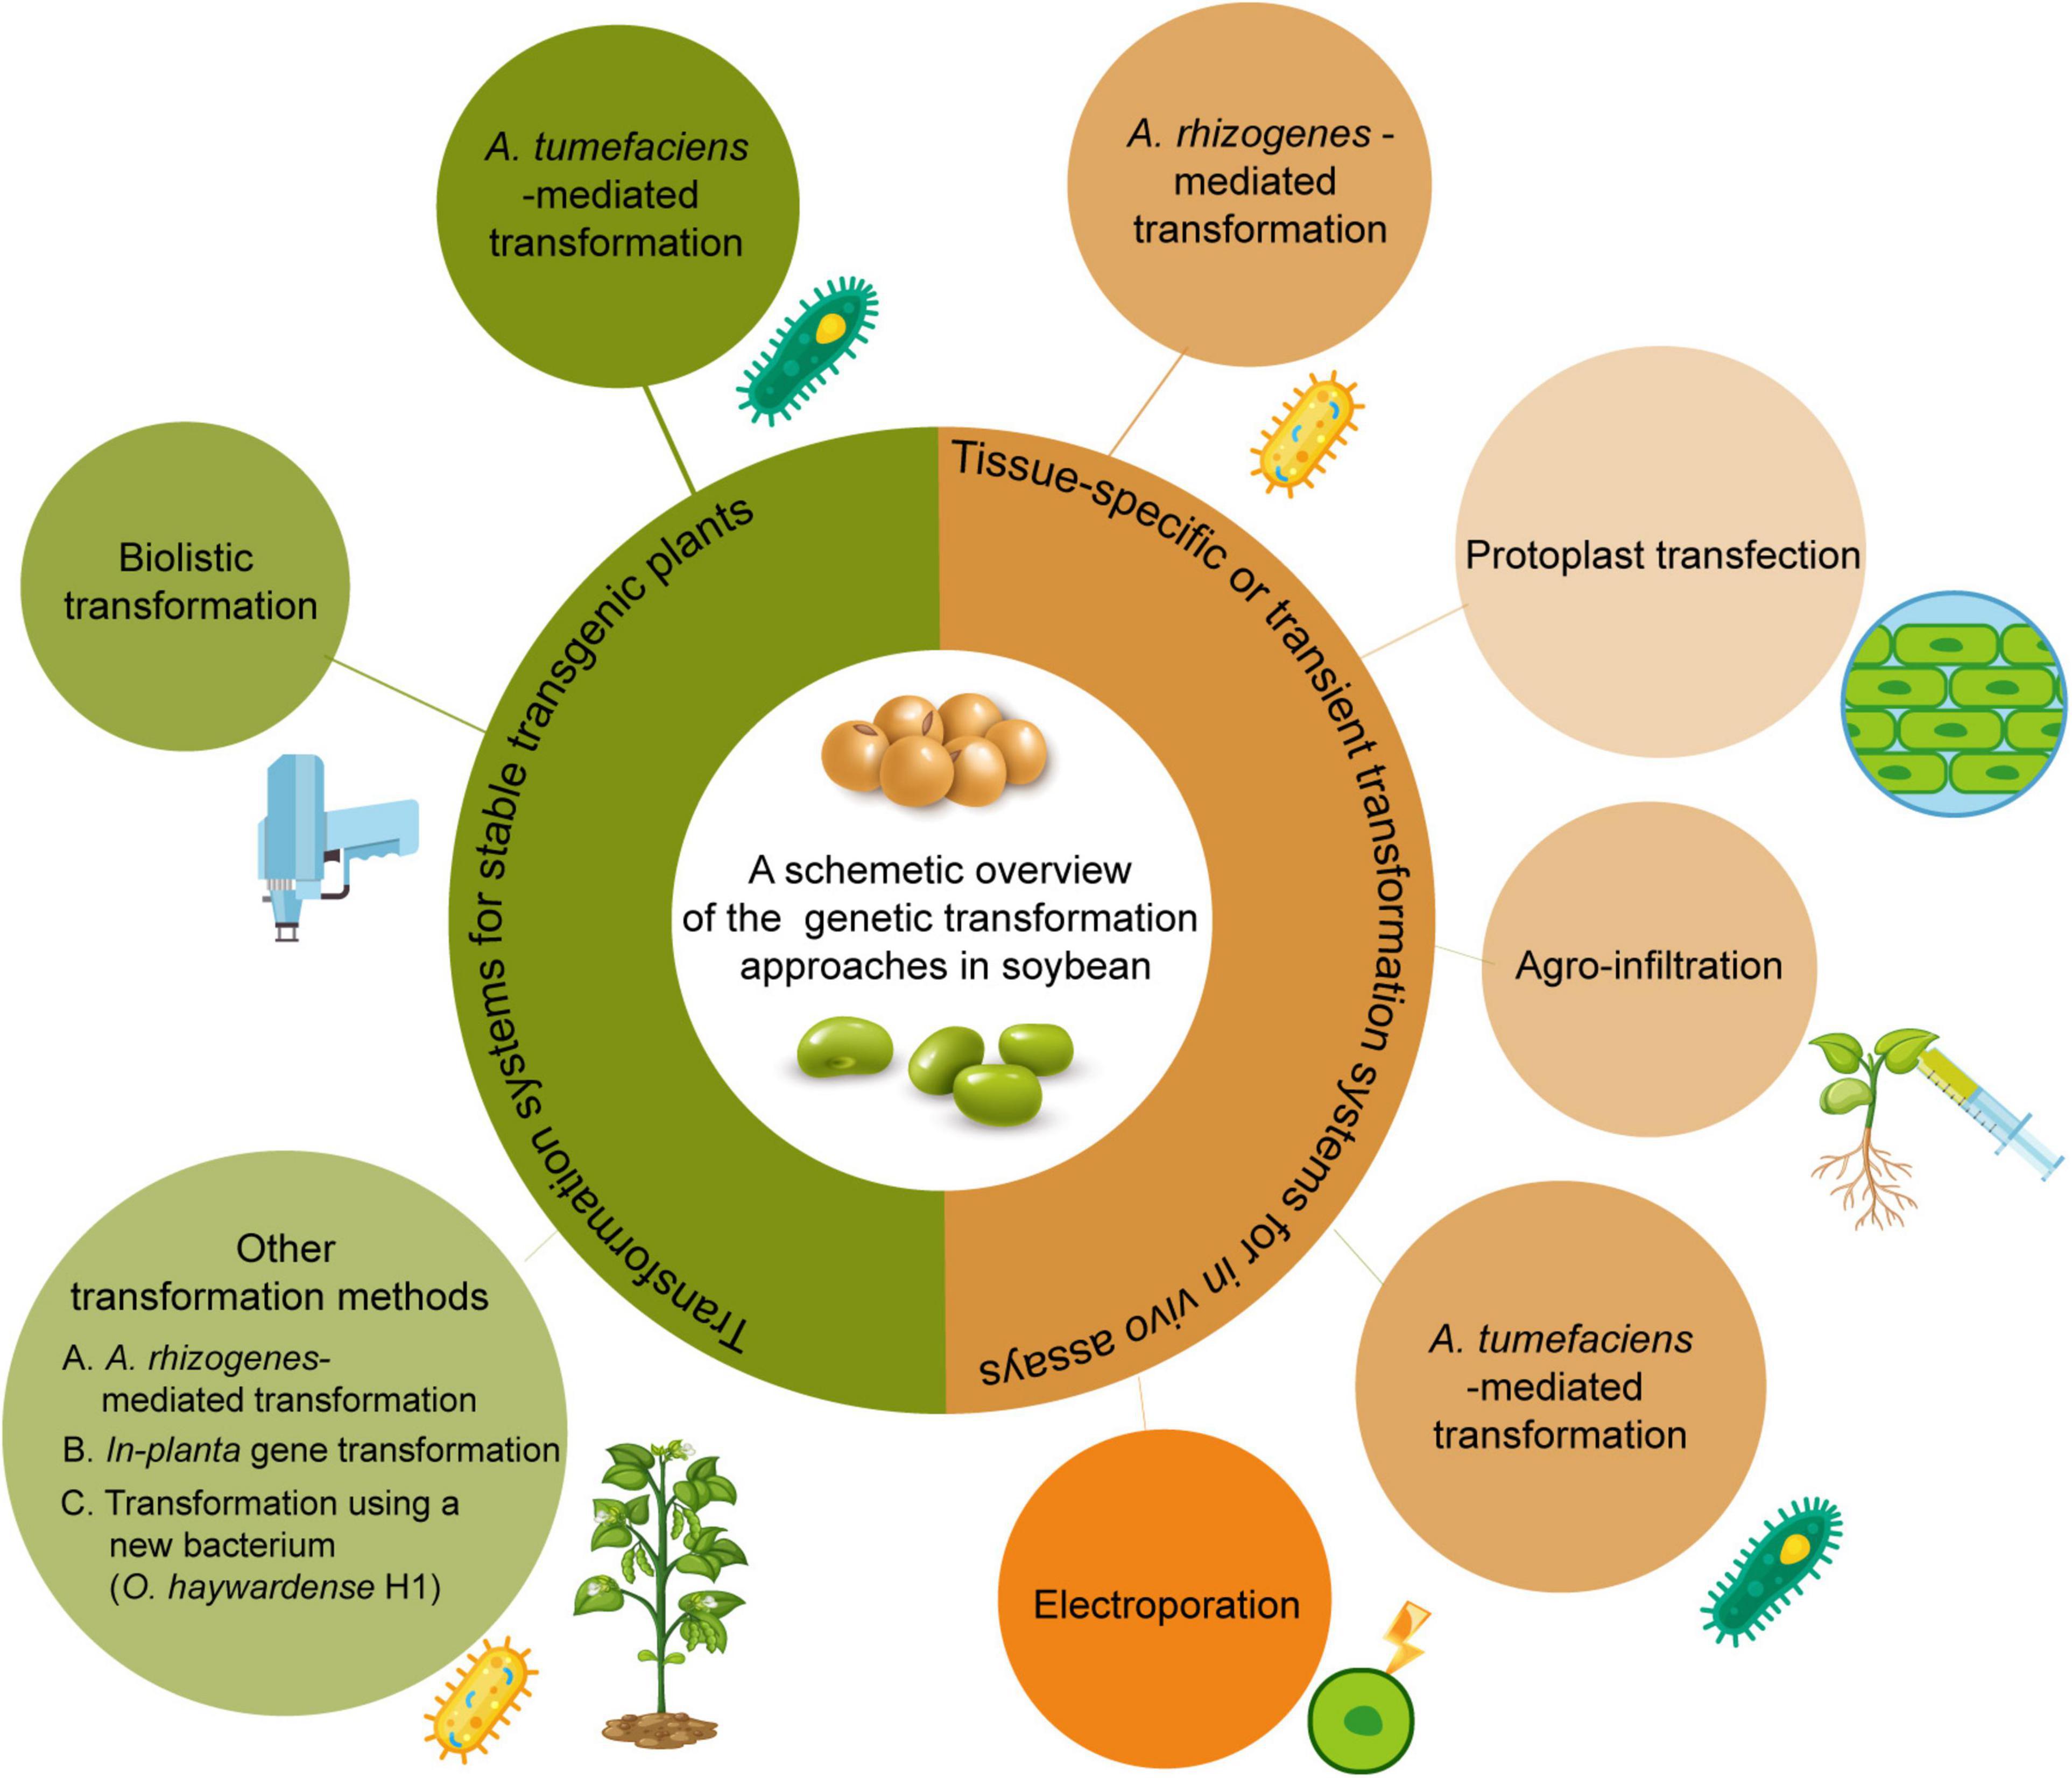 Frontiers | Progress in Soybean Genetic Transformation Over the Last Decade